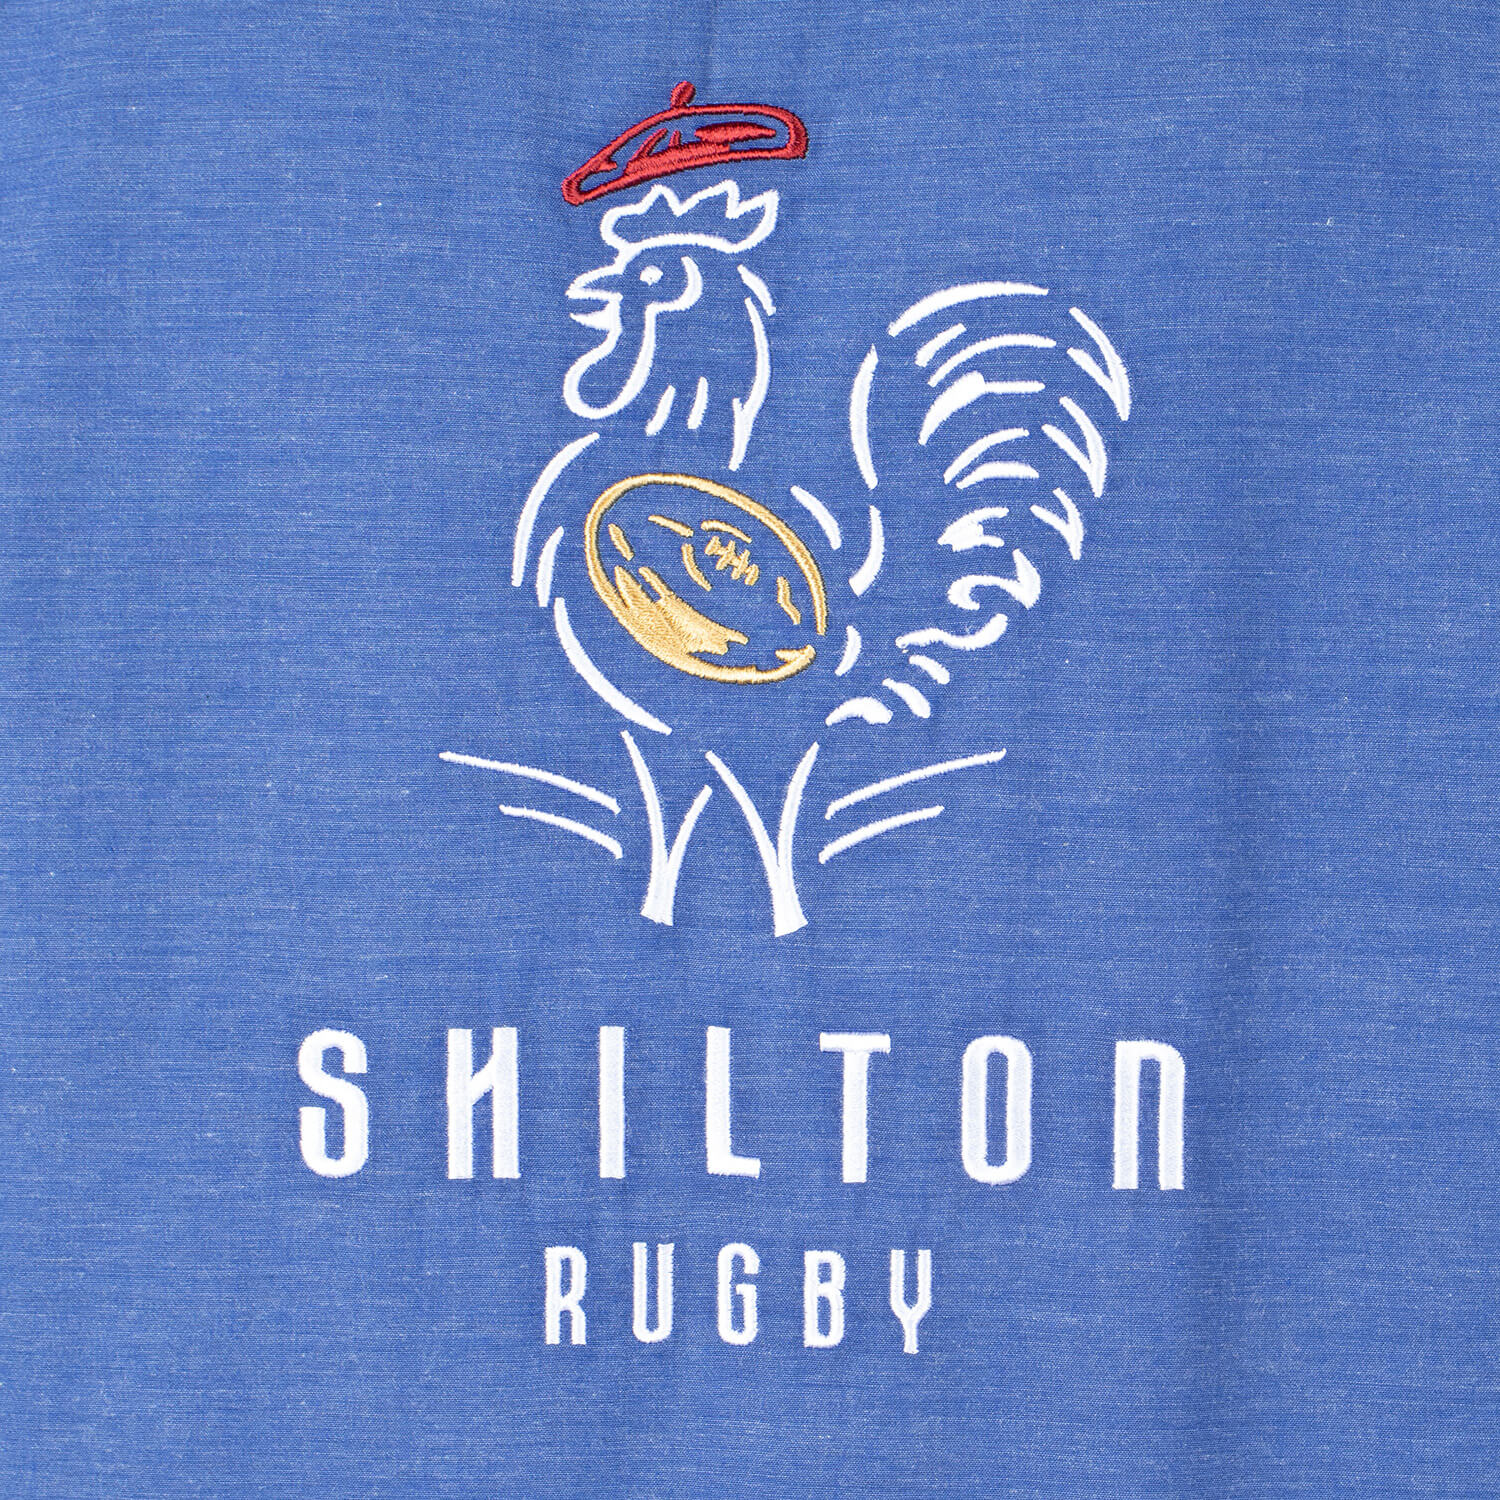 Chemise France rugby